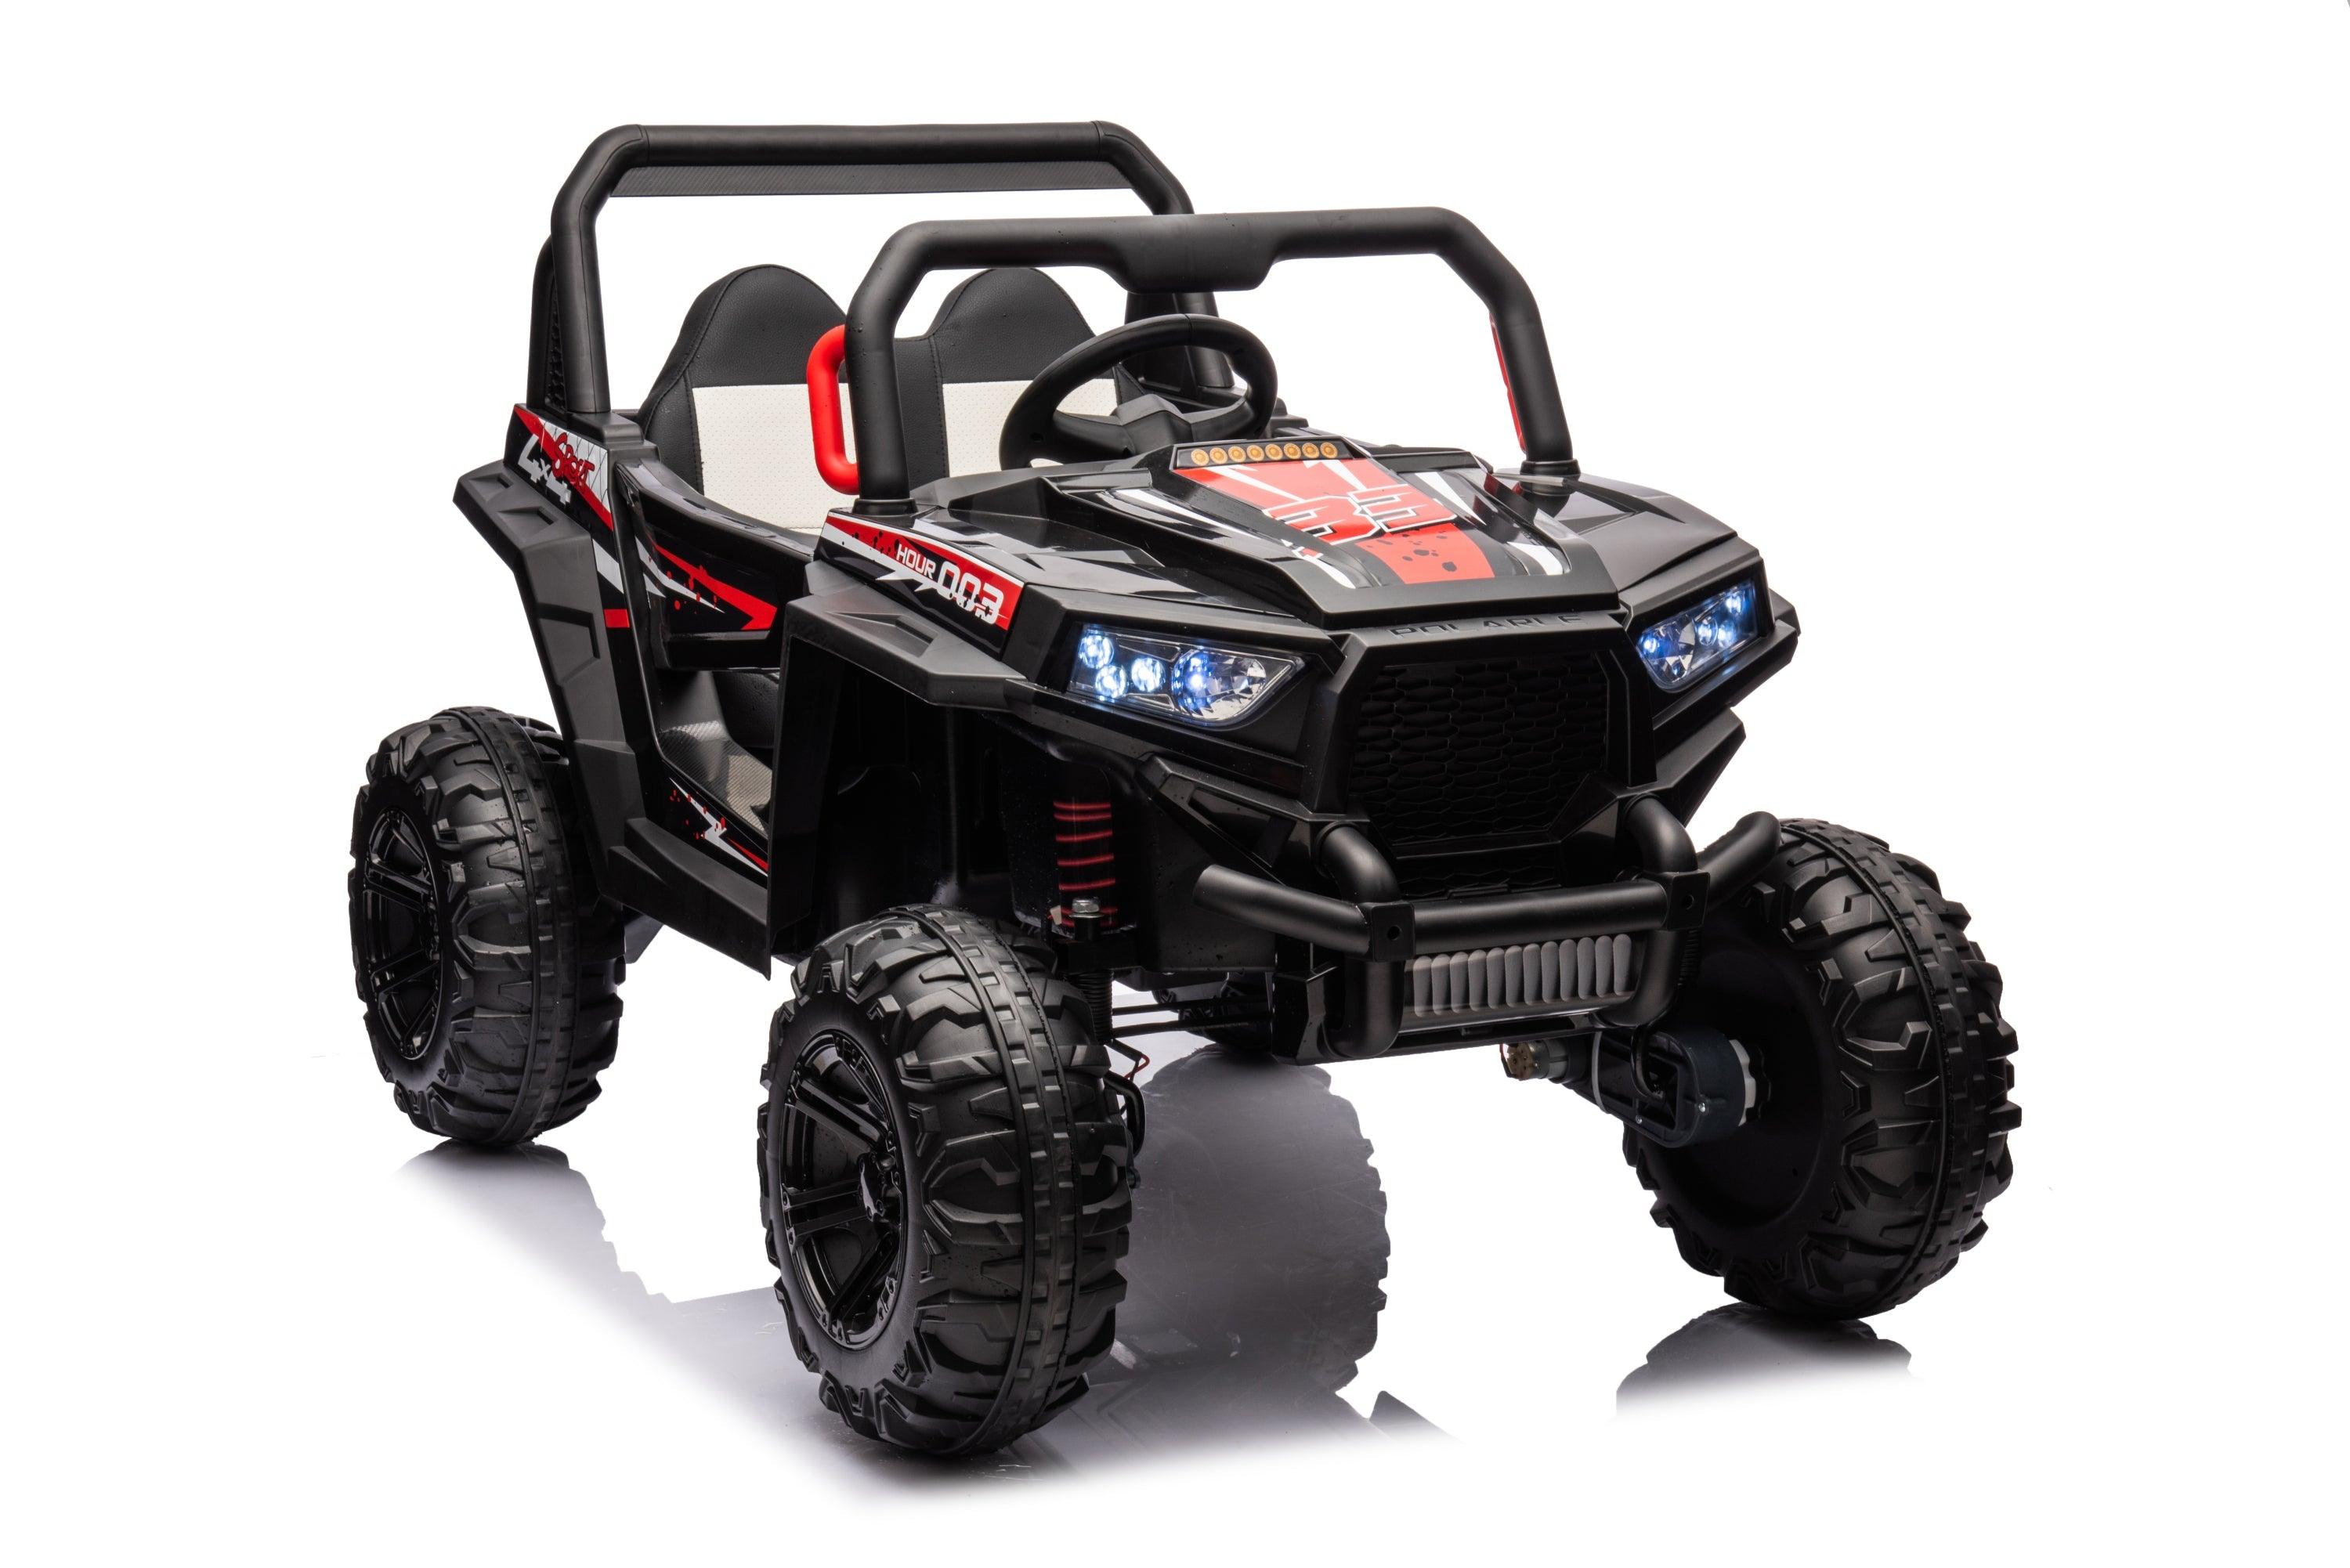 12V Four-Wheel Drive Leather Seat One Button Start, Forward & Backward, High & Low Speed,  Music, Front Light, Power Display, R/C LamCham